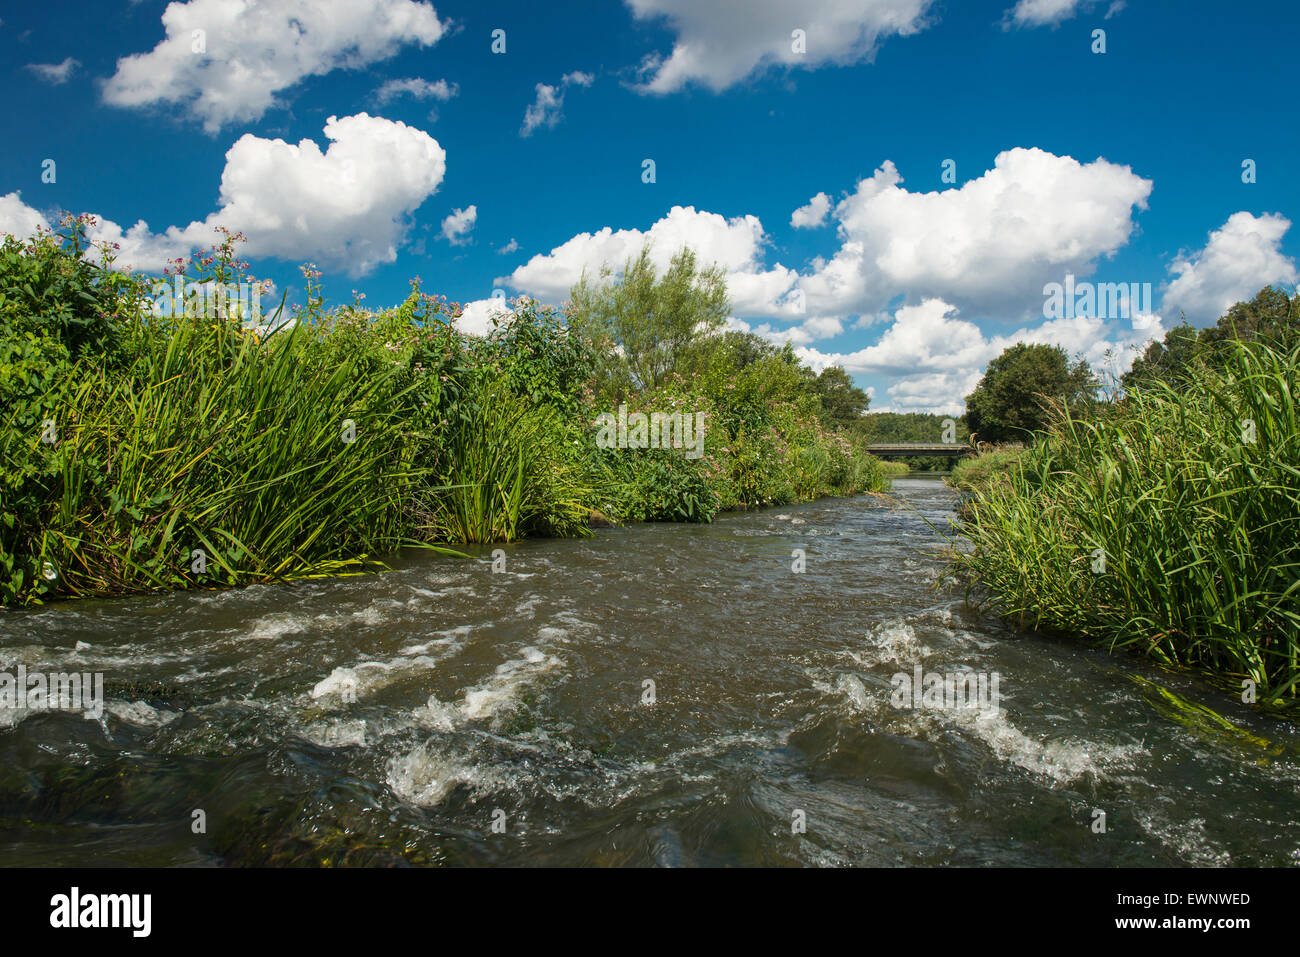 fish pass in hunte river near goldenstedt, oldenbuger land, lower saxony, germany Stock Photo